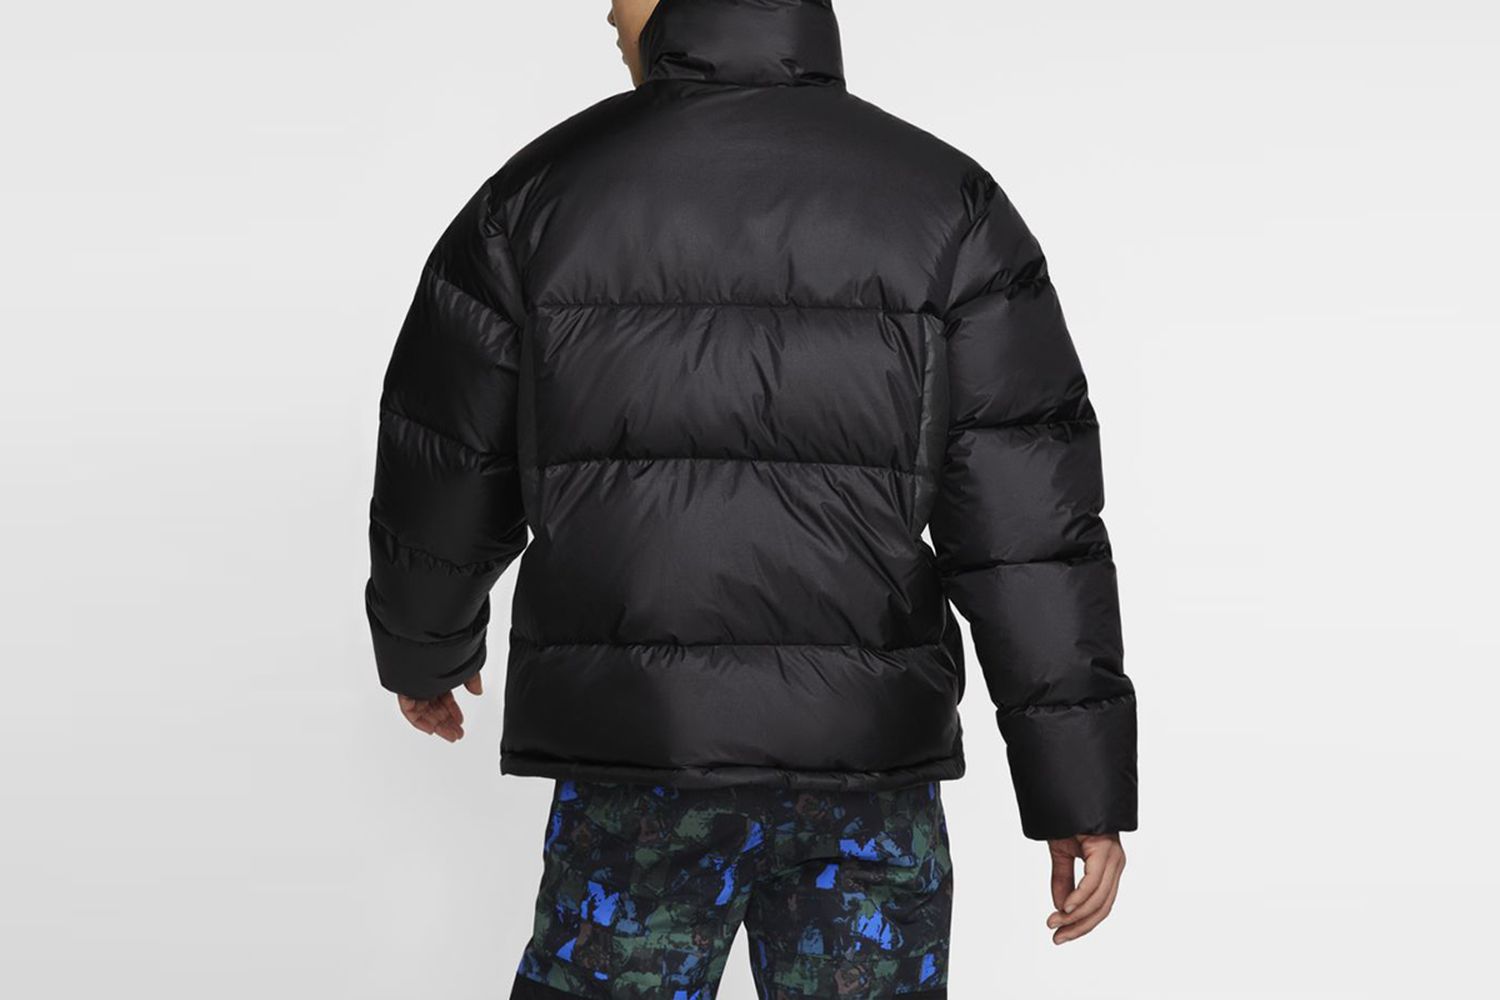 The Best Nike Winter Outerwear to Shop Right Now